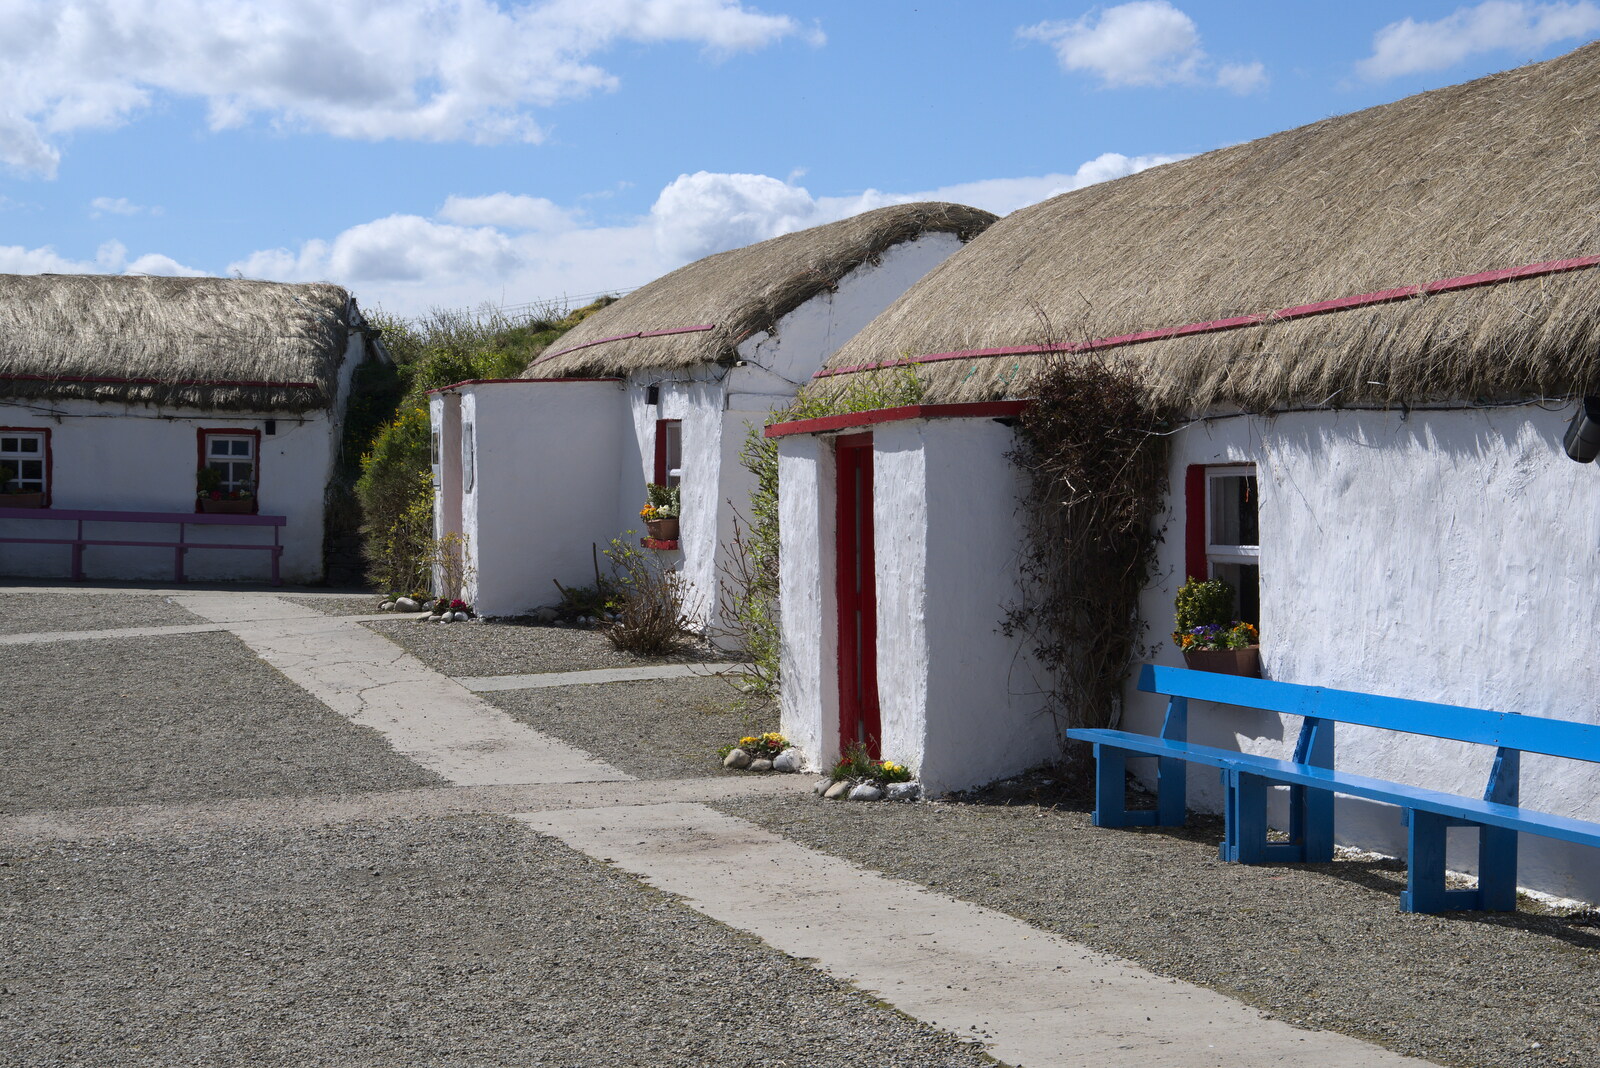 Greencastle, Doagh and Malin Head, County Donegal, Ireland - 19th April 2022: Traditional thatched cottages at the Famine museum